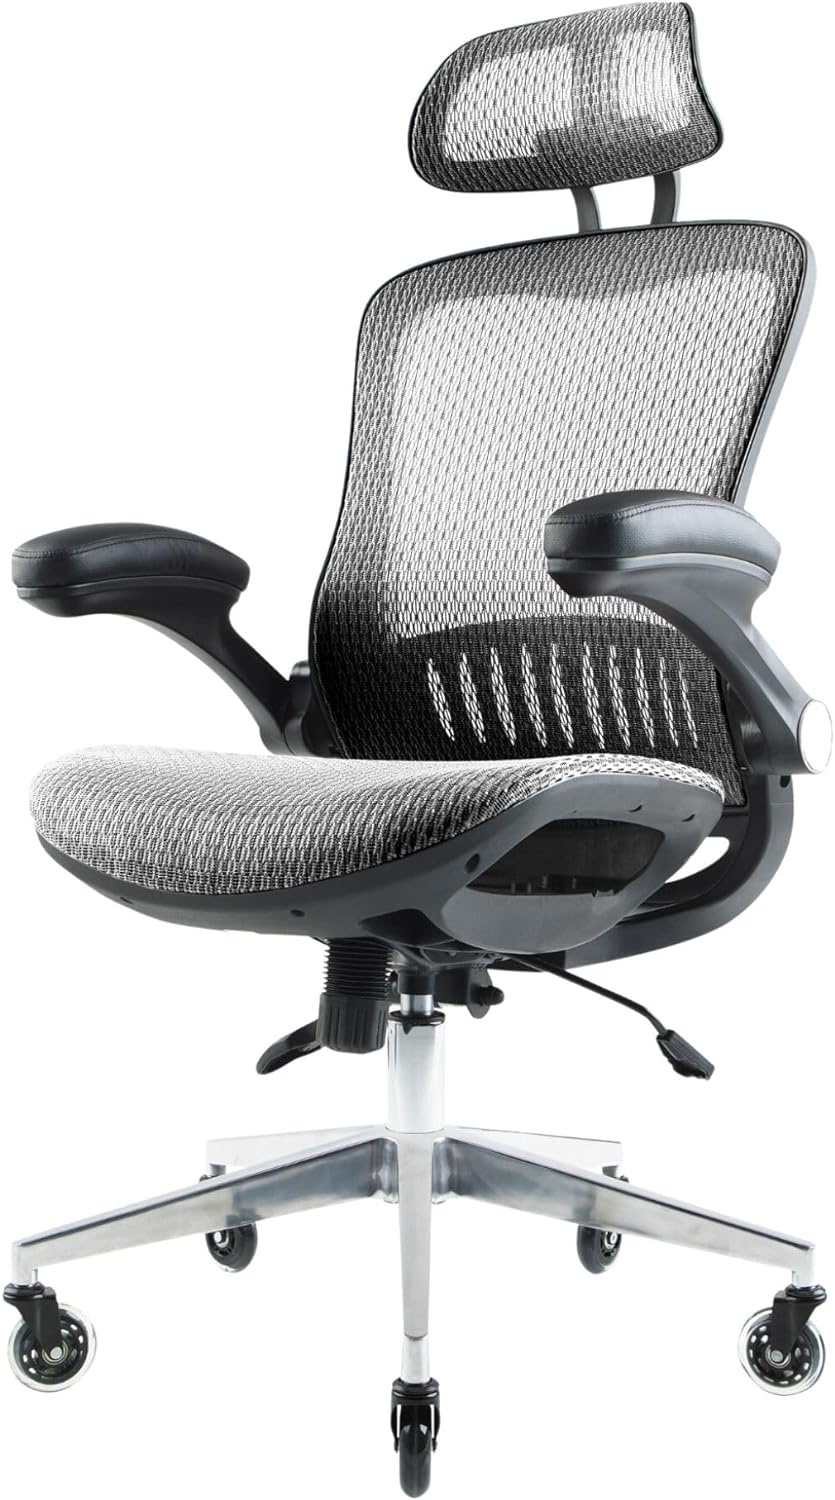 Catch the Best Deals: Buy Managerial Executive Chairs Online on Monaco